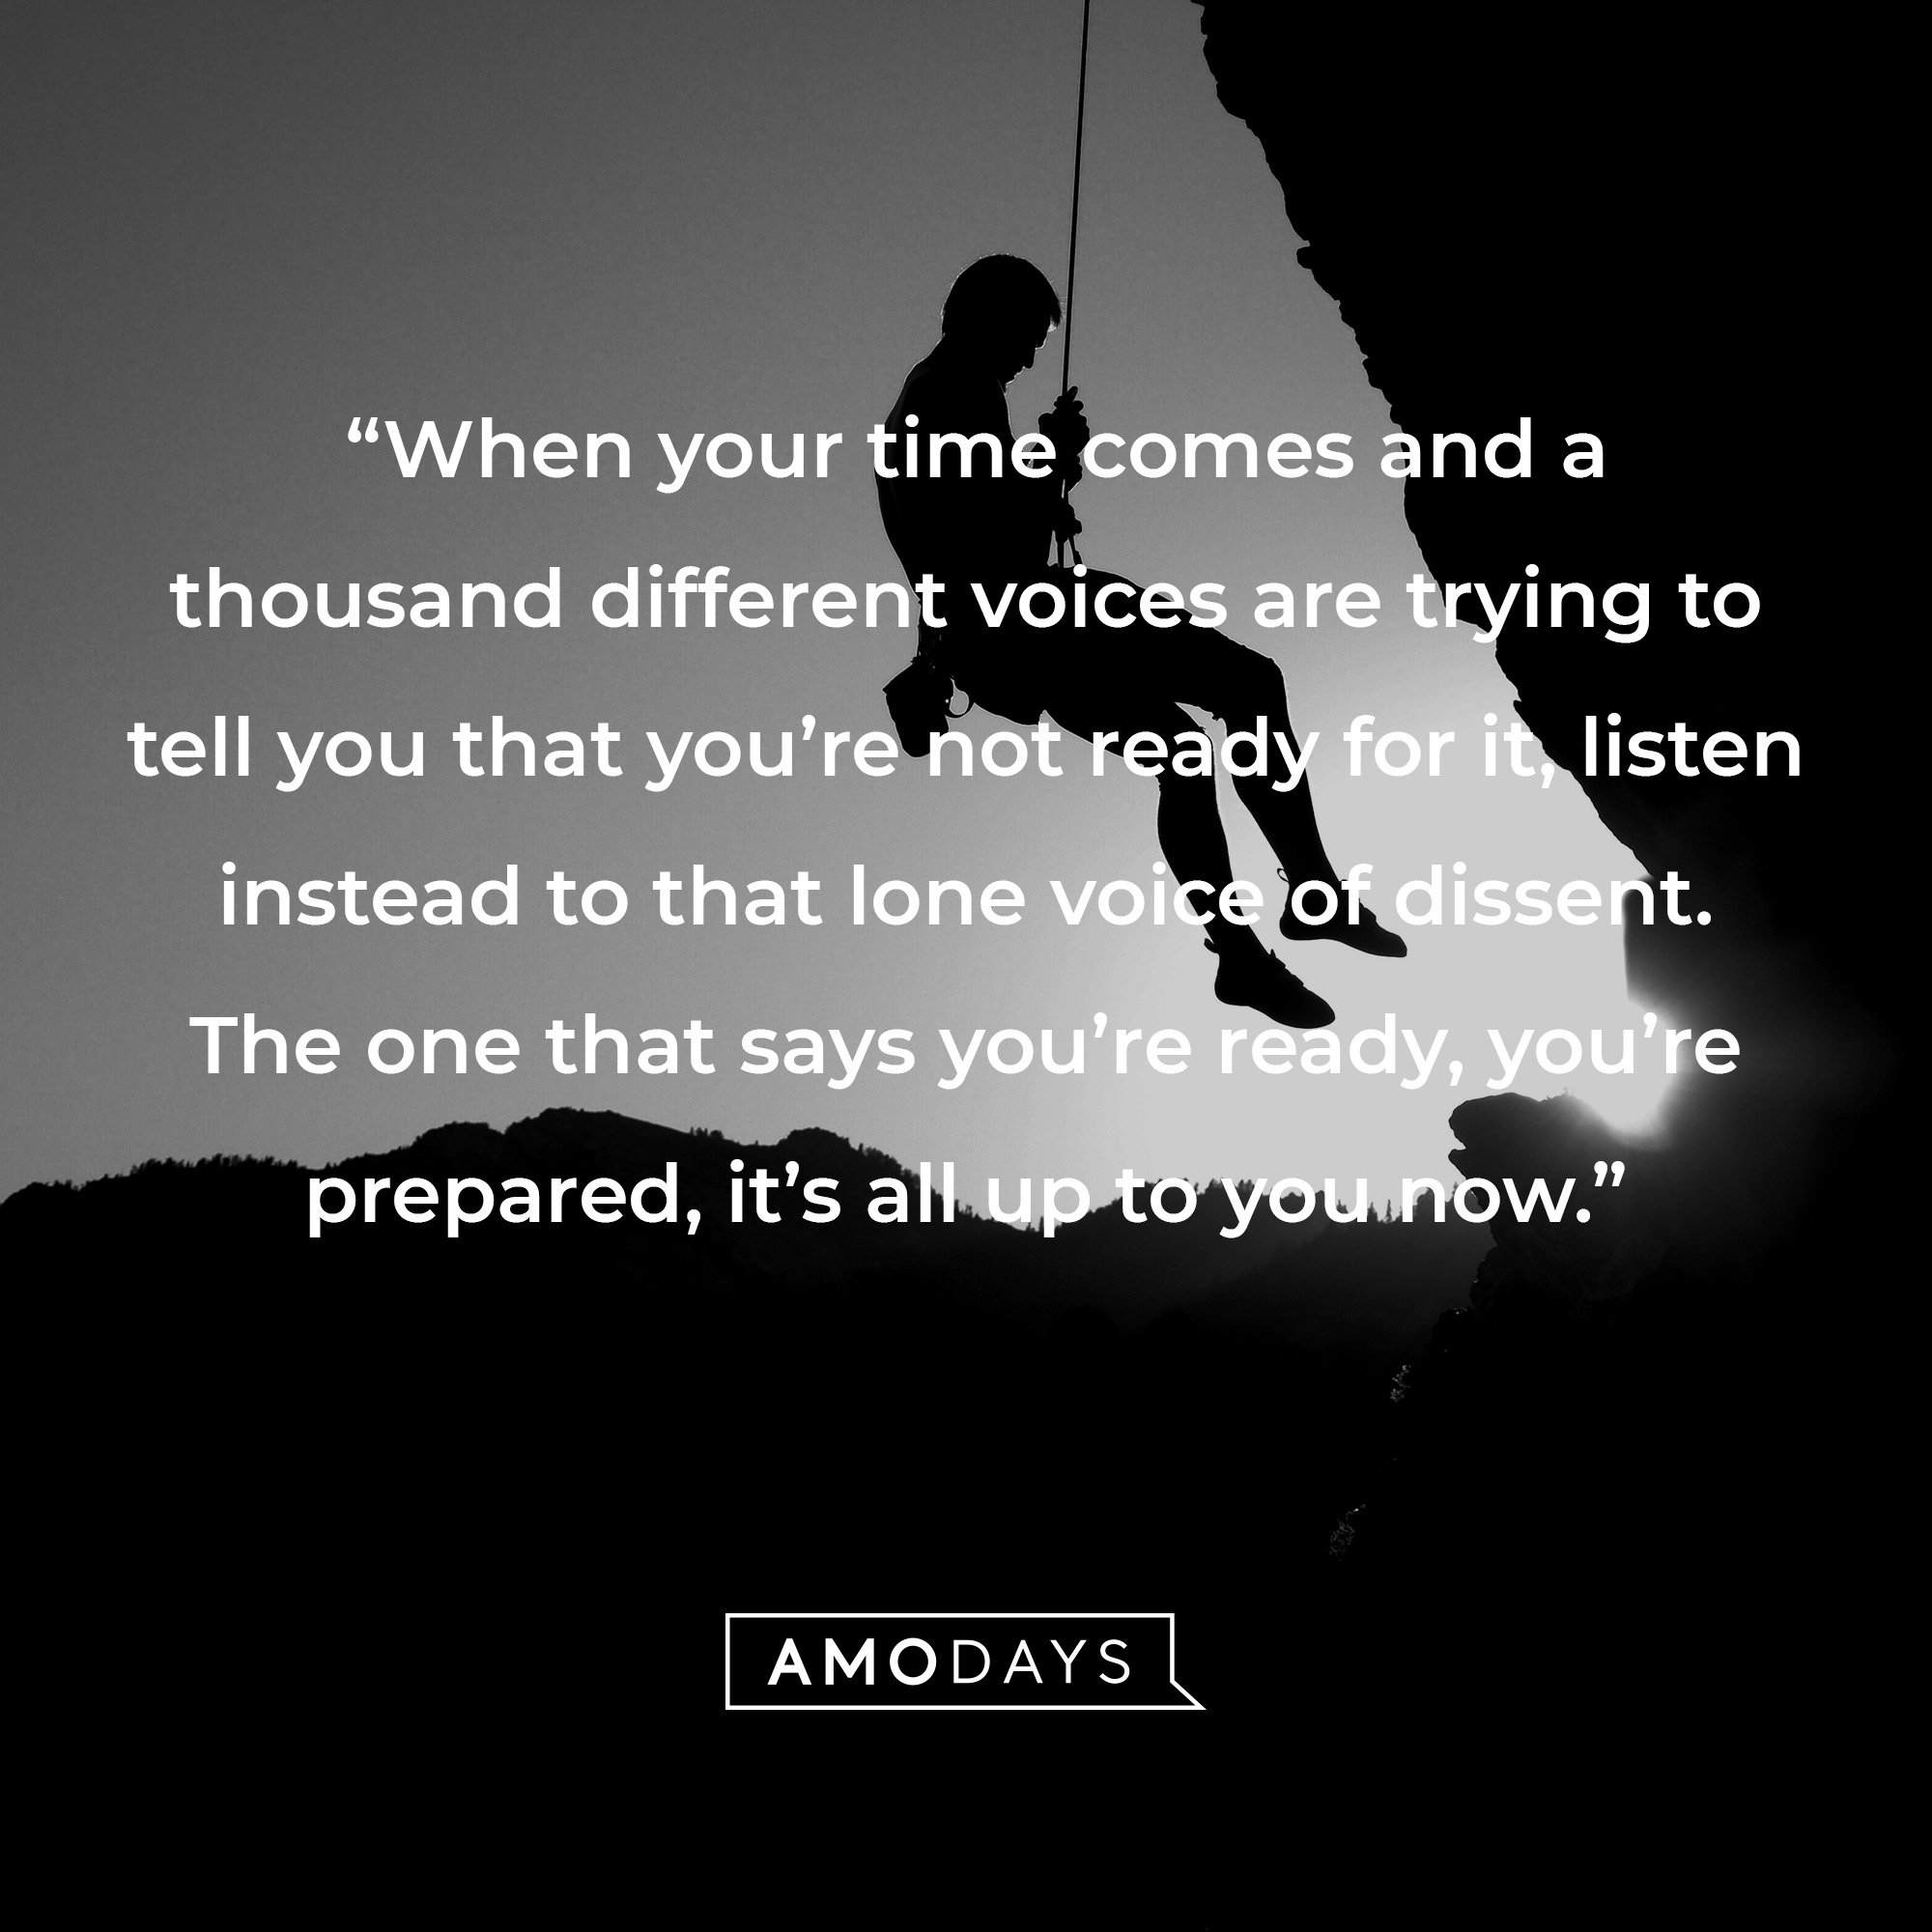 Nike’s quote: “When your time comes and a thousand different voices are trying to tell you that you’re not ready for it, listen instead to that lone voice of dissent.  The one that says you’re ready, you’re prepared, it’s all up to you now.” | Source: AmoDays